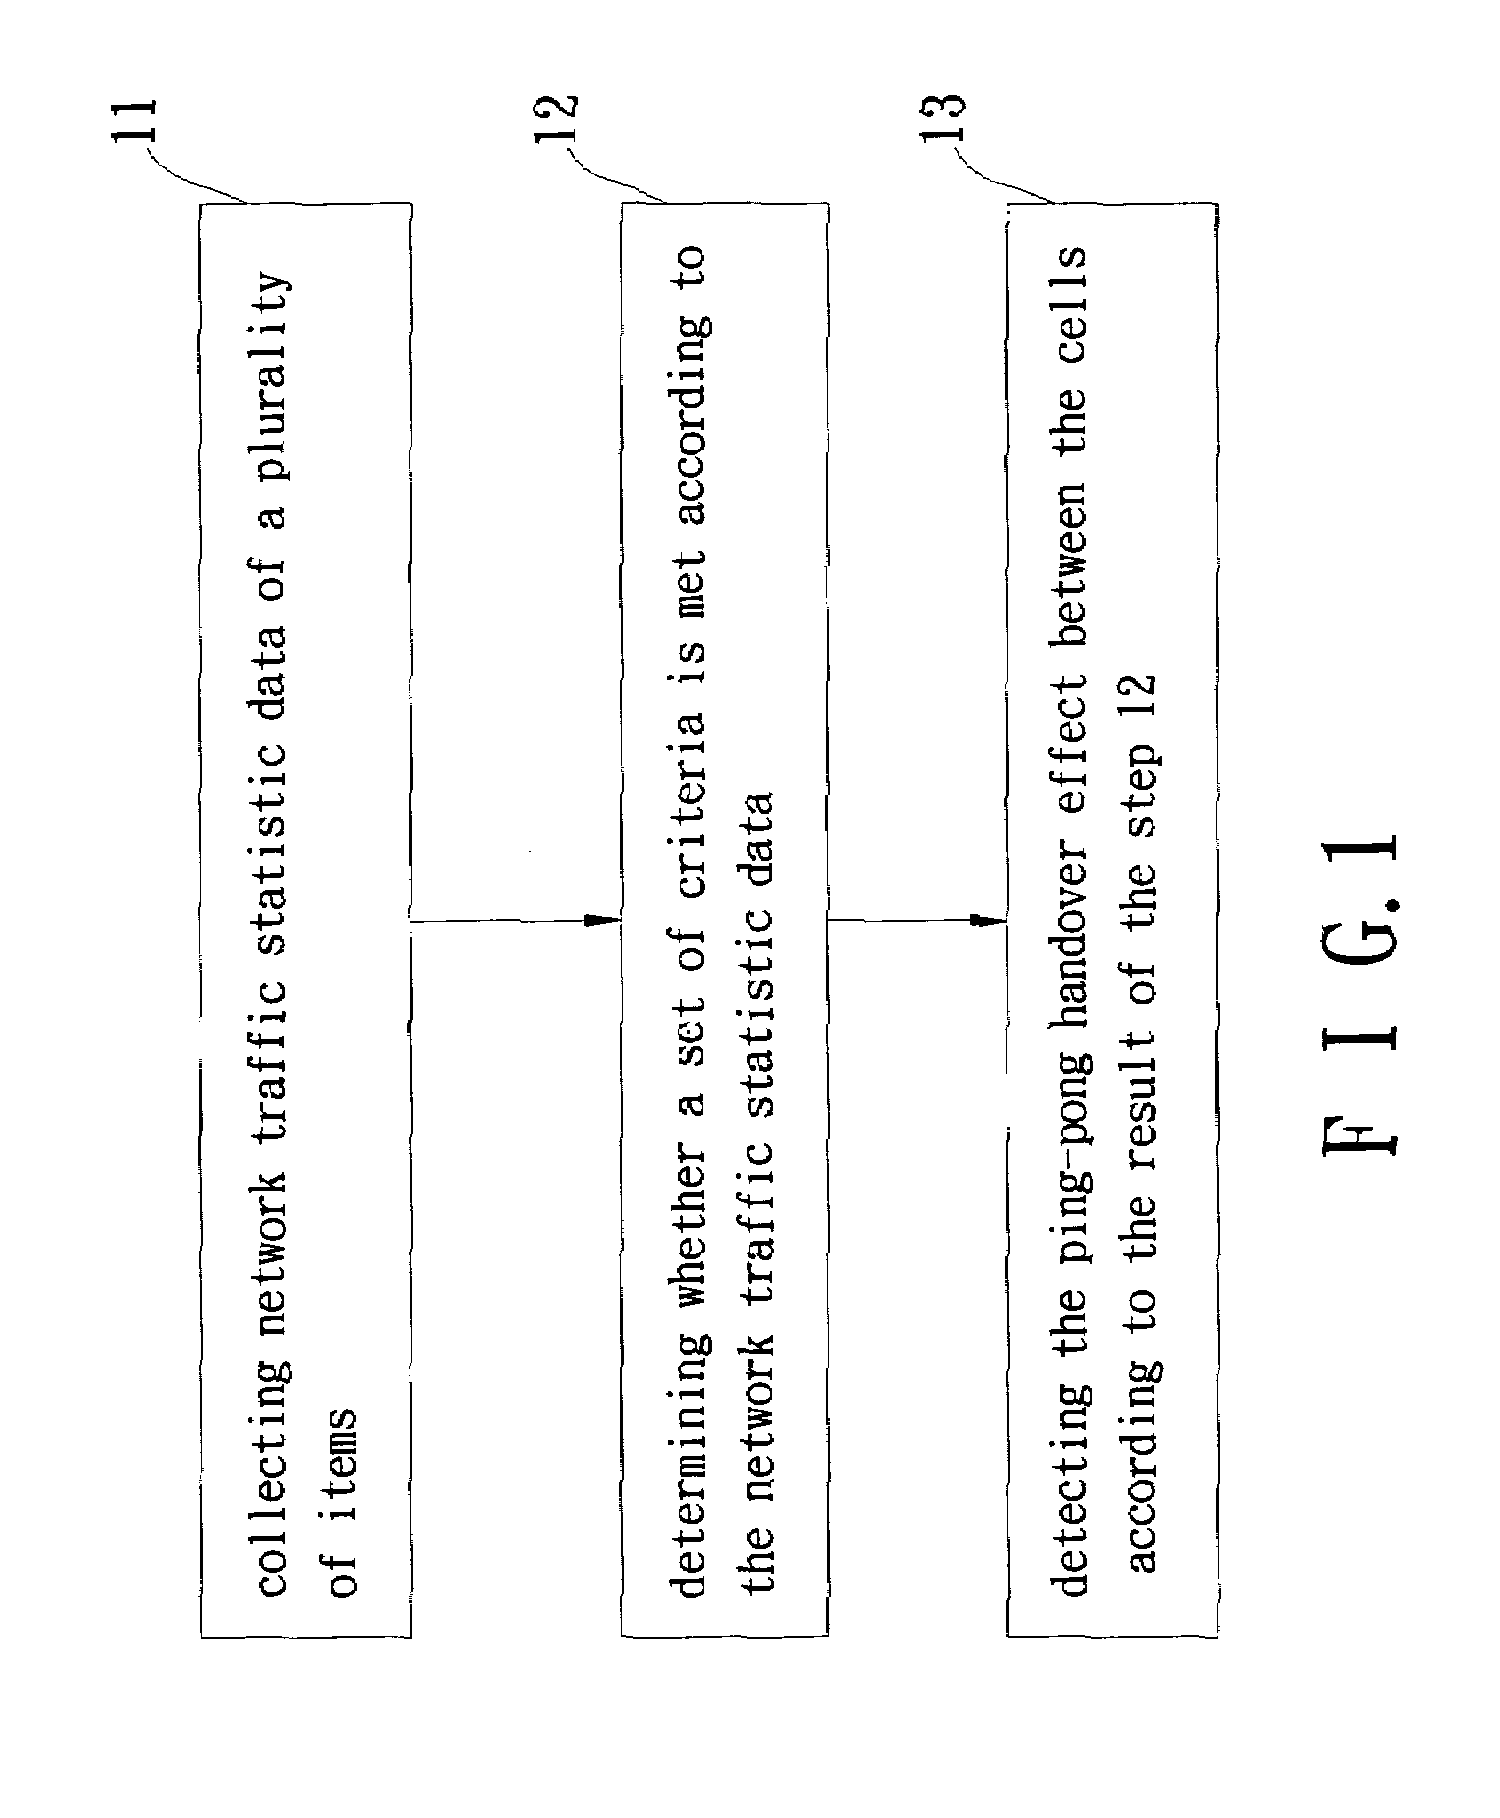 Method for detecting and reducing ping-pong handover effect of cellular network